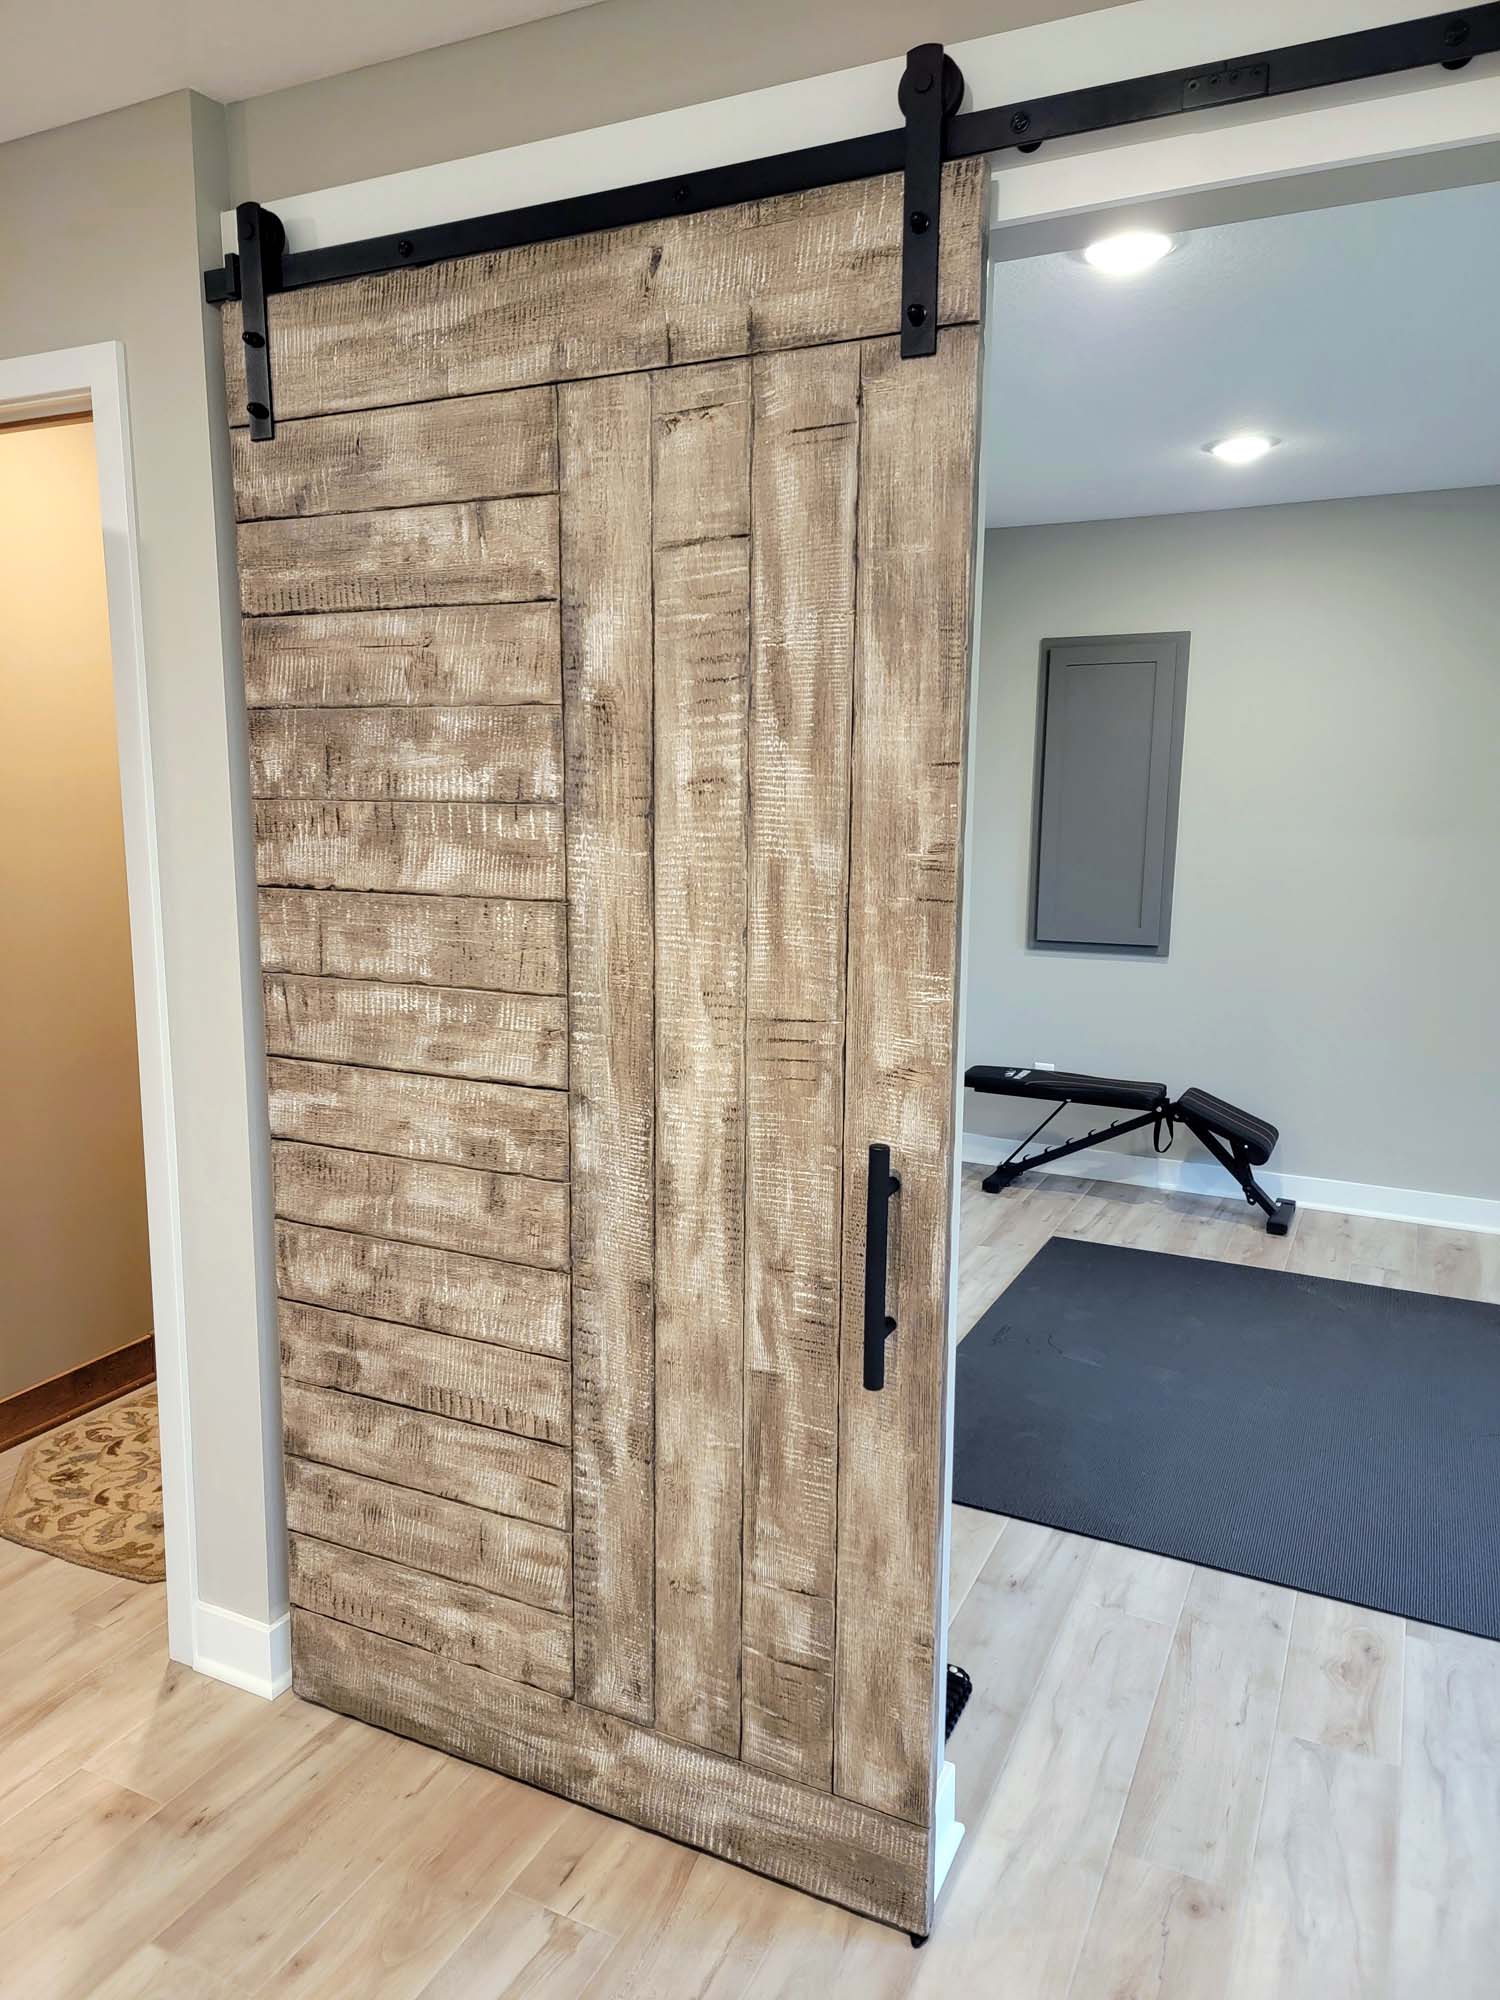 Left side barn track door to exercise room